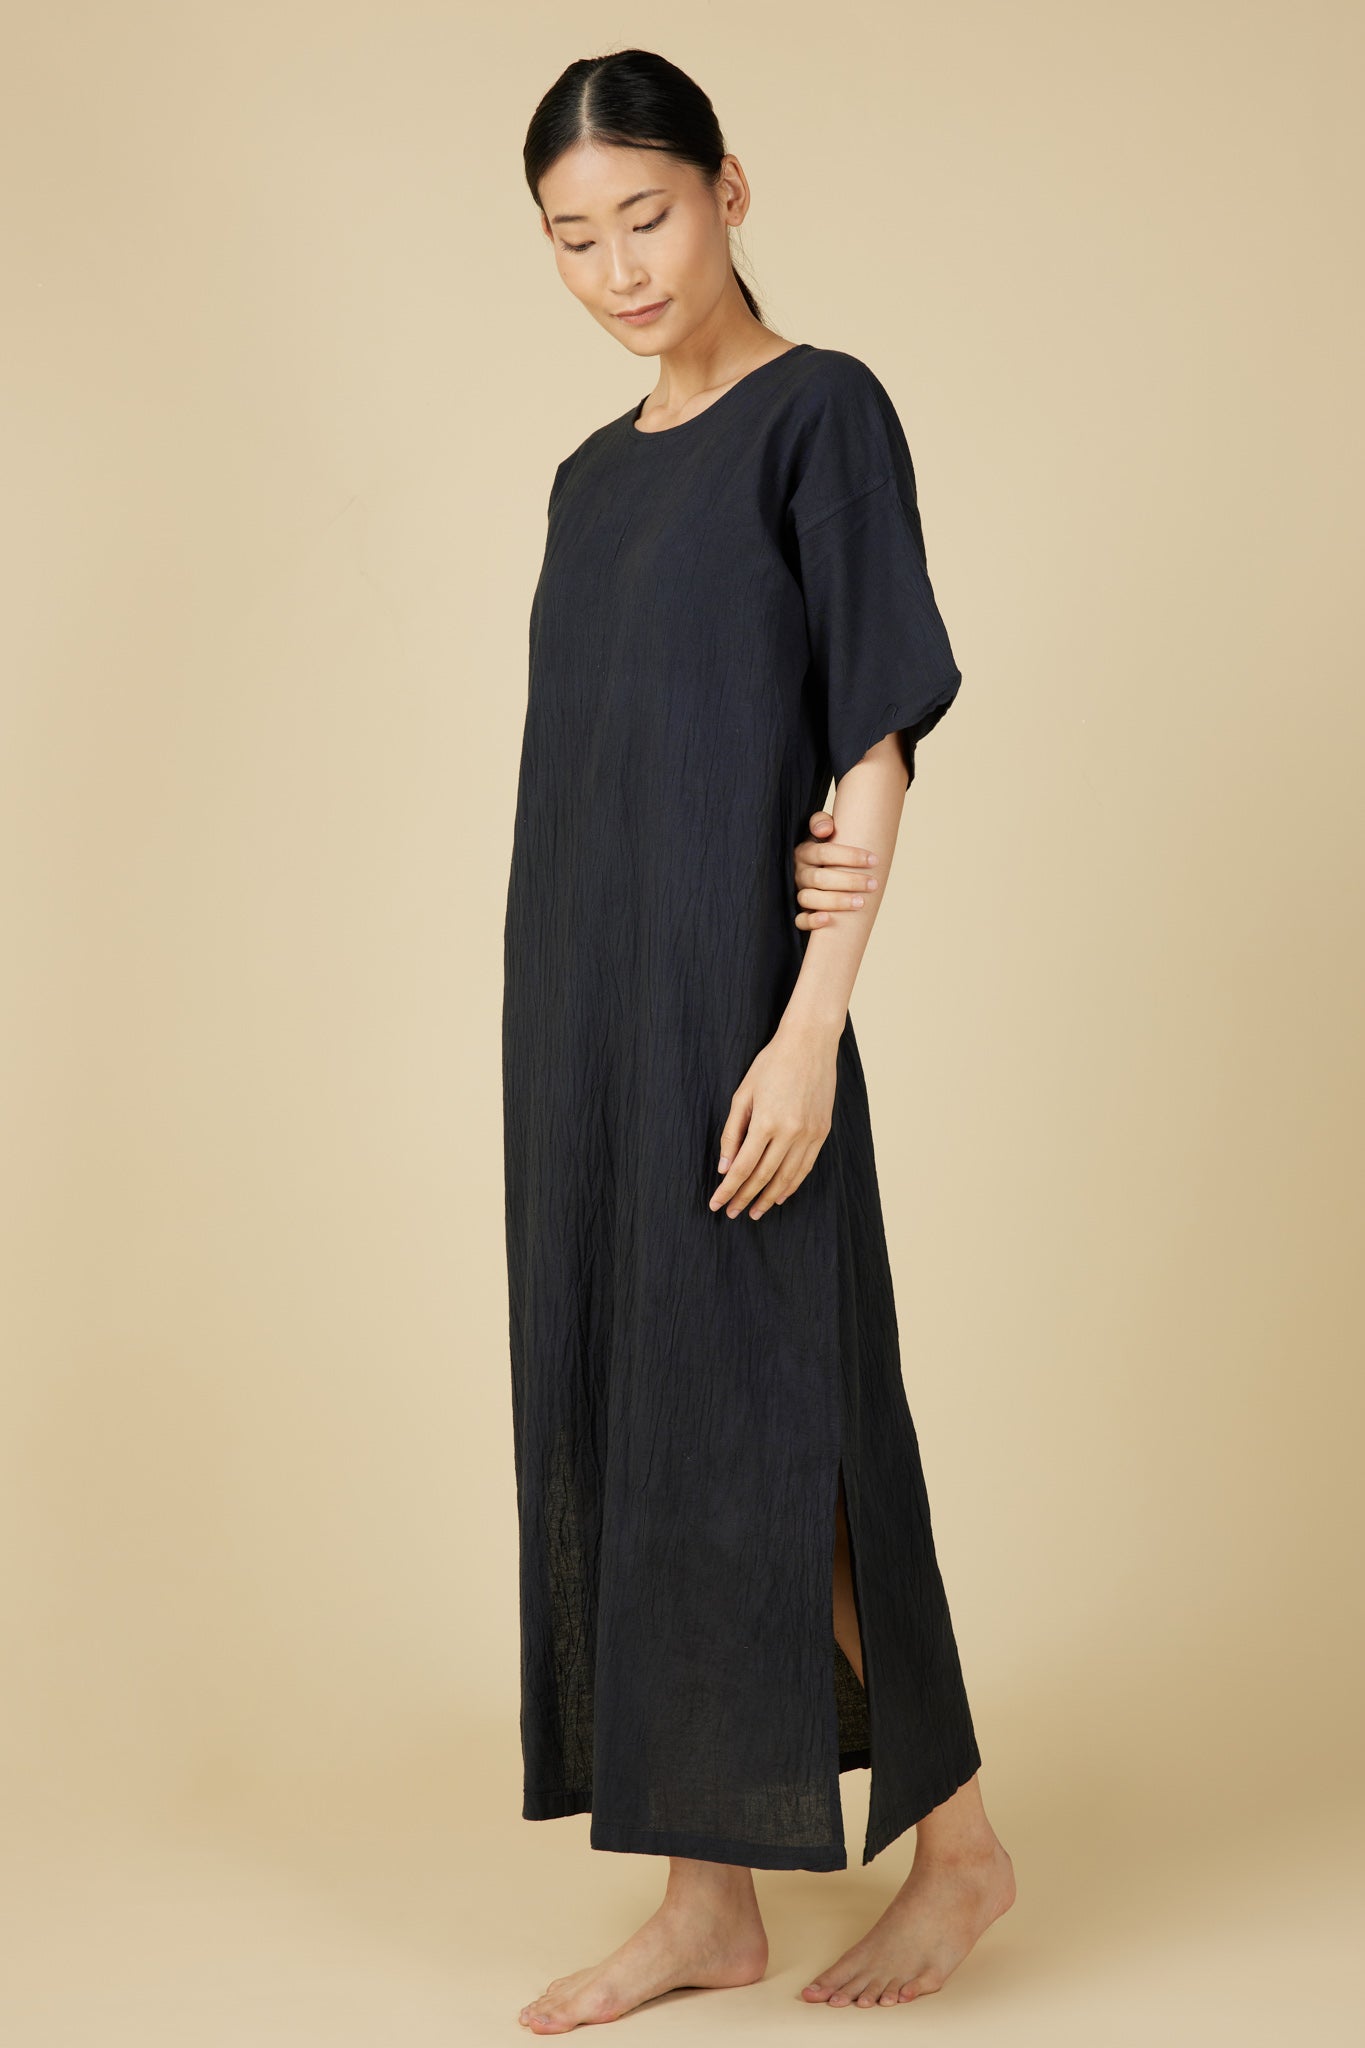 Hand Dyed Short Sleeve Dress in Black